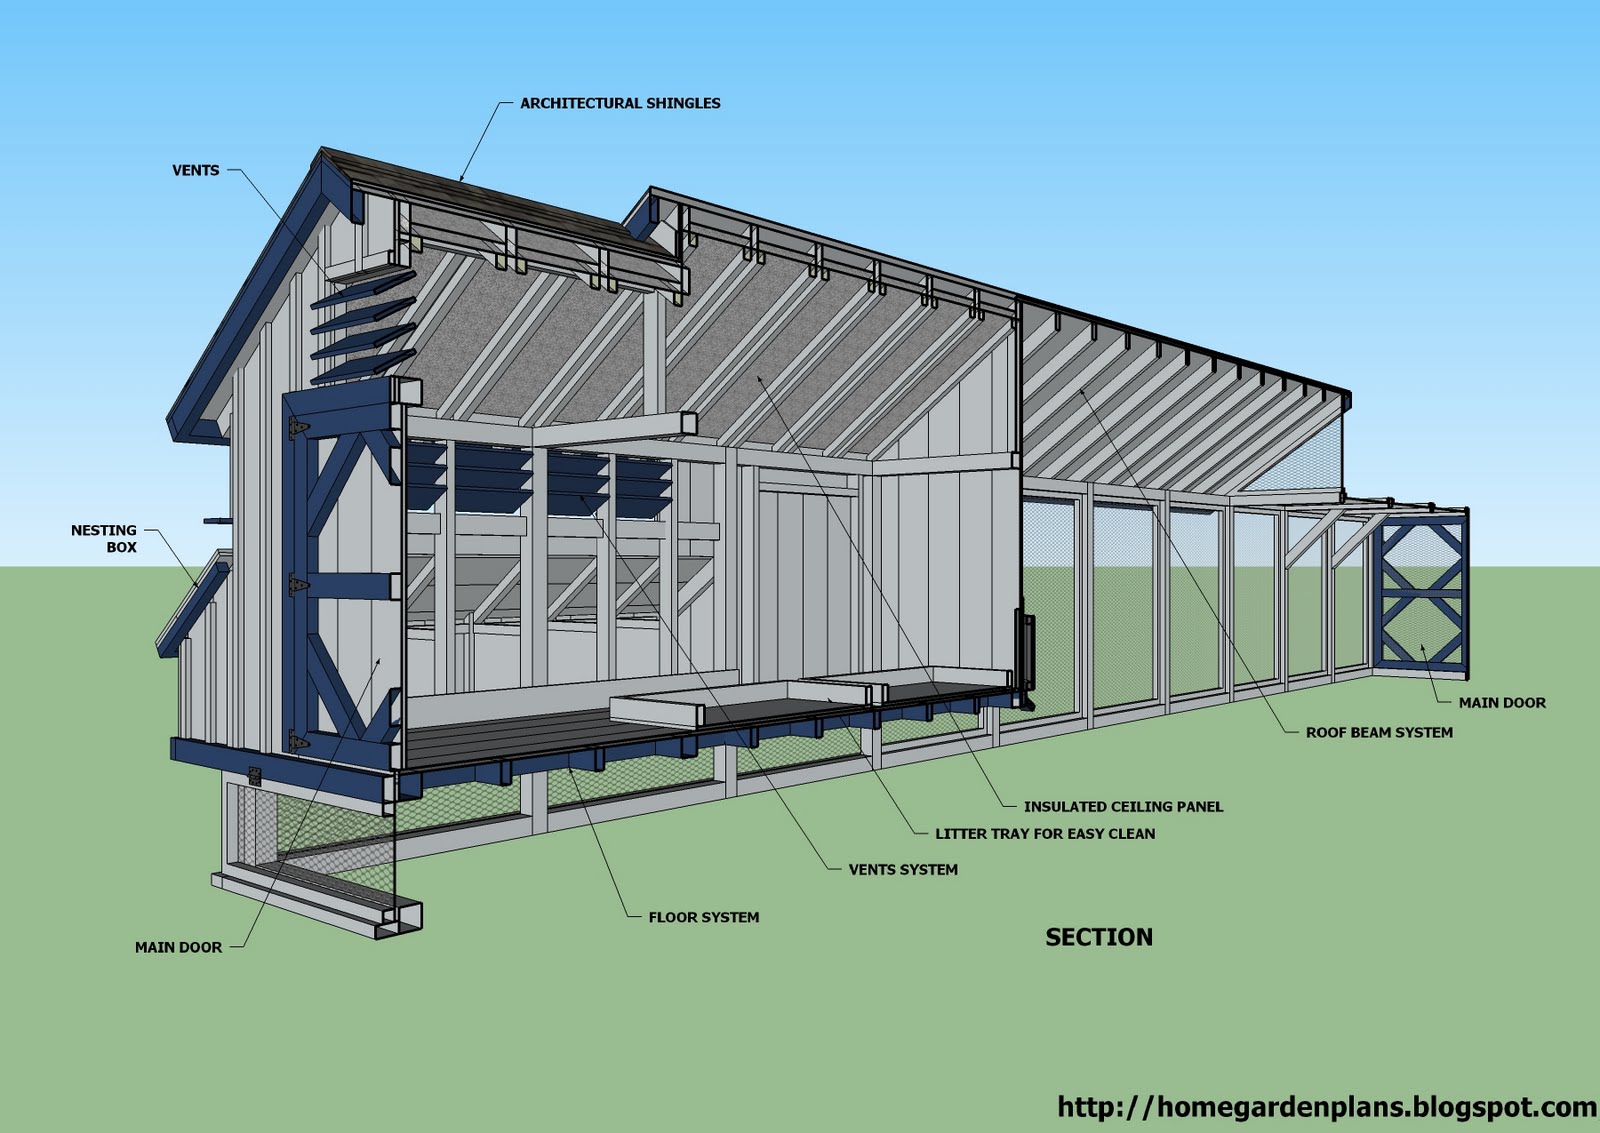 plans: L200 - Large Chicken Coop Plans - How to Build a Chicken Coop 